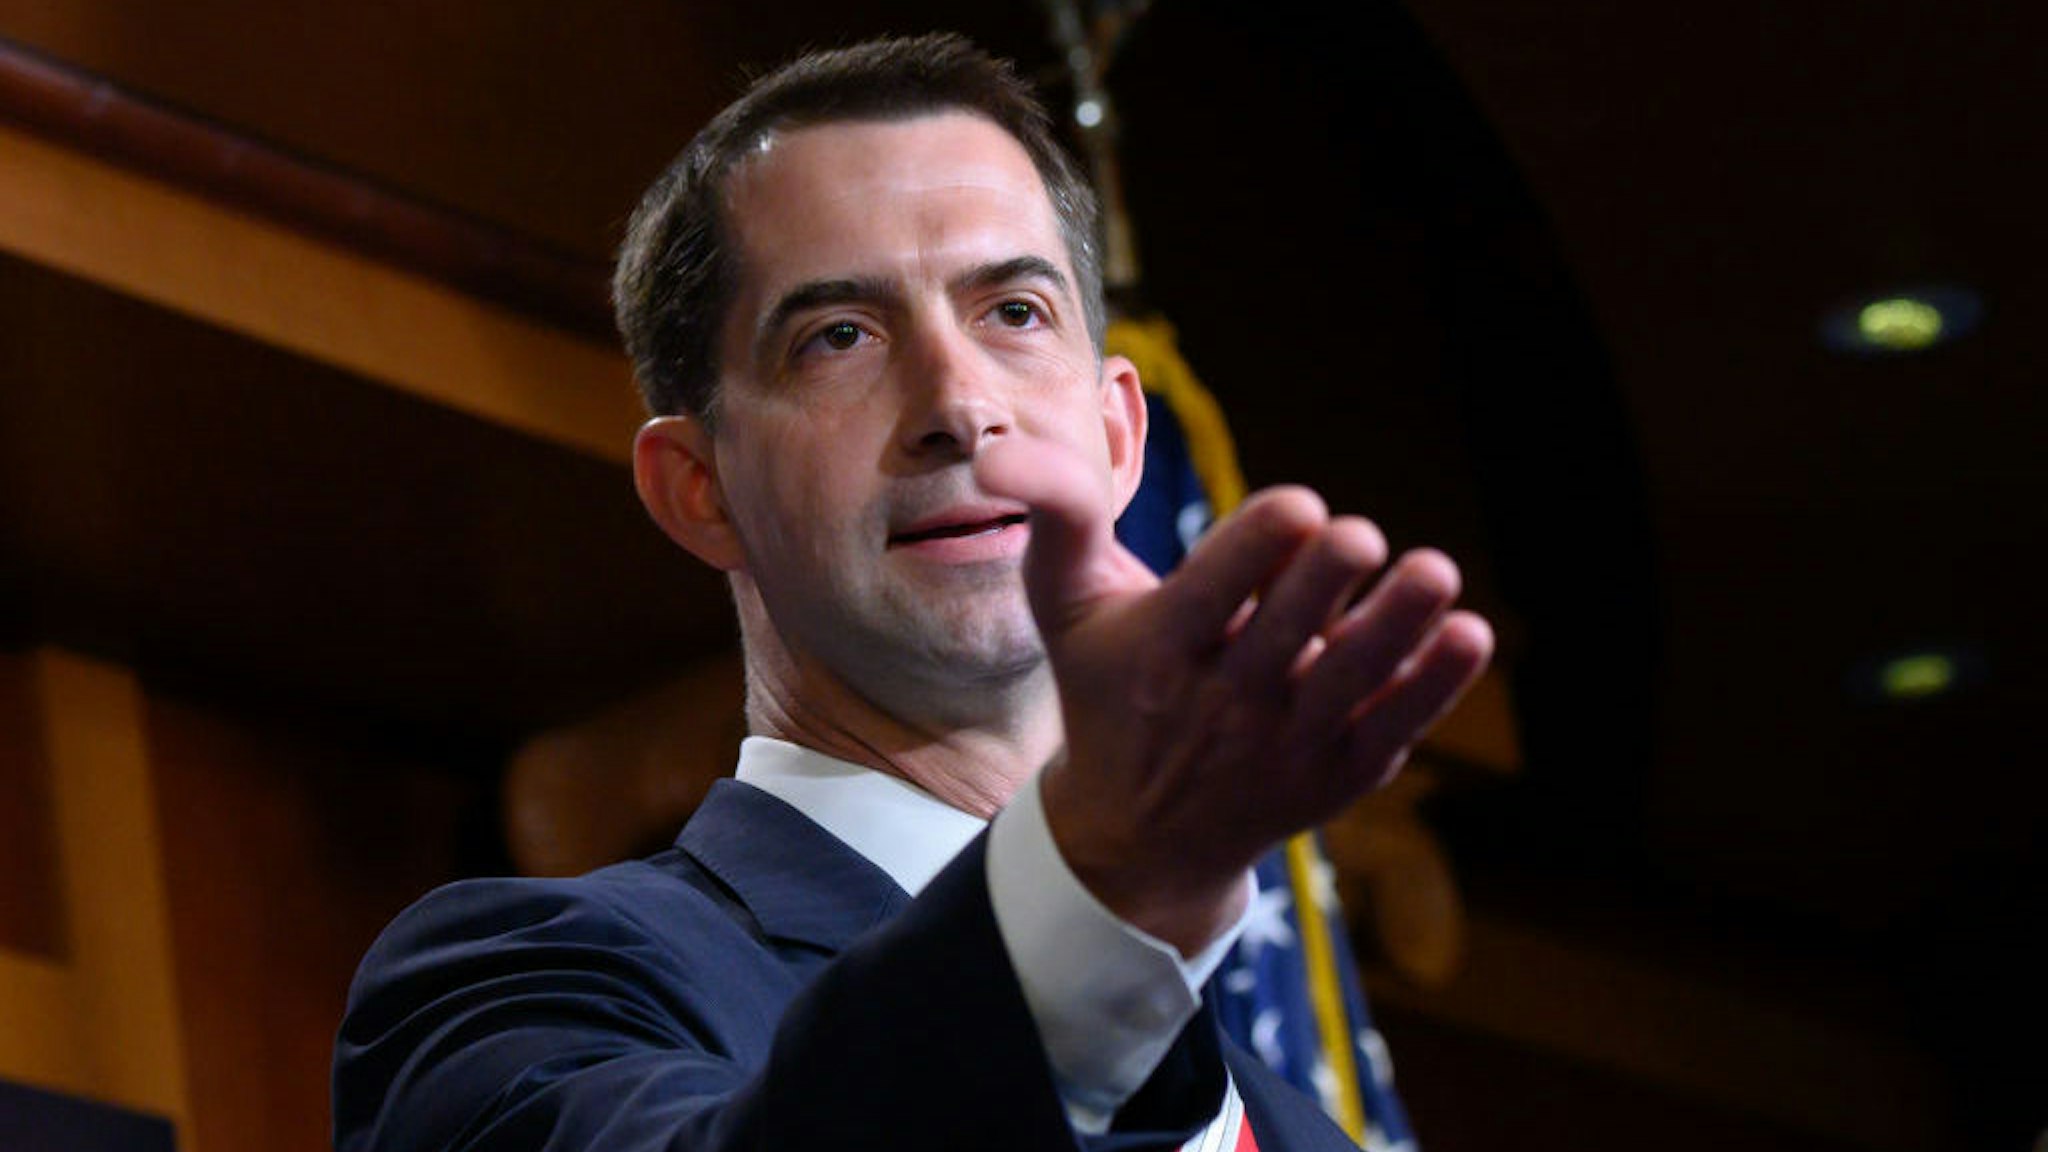 Senator Tom Cotton, a Republican from Arkansas, speaks during a news conference on Republican opposition to statehood for the District of Columbia at the U.S. Capitol in Washington, D.C., U.S., on Wednesday, July 1, 2020. House Democrats voted last week for the first time in history to make the U.S. capital a state, a mostly symbolic move that highlights some of the issues of race and equality driving election-year politics. Photographer: Erin Scott/Bloomberg